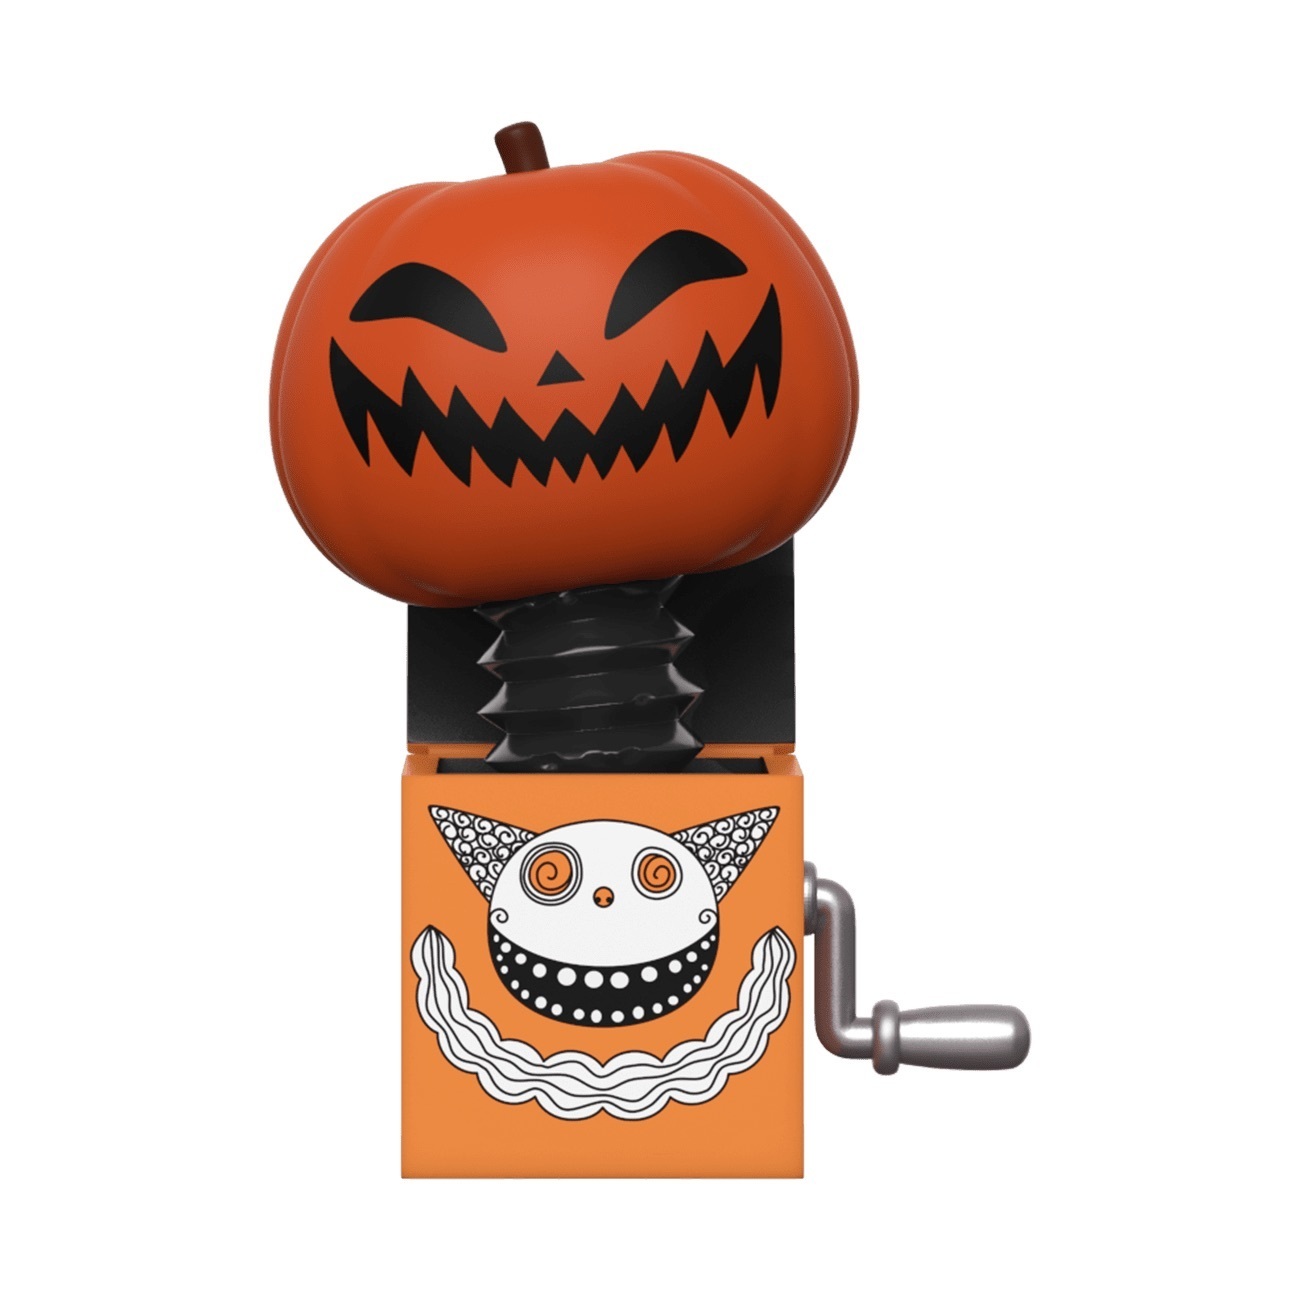 FUNKO MYSTERY MINIS NIGHTMARE BEFORE CHRISTMAS PUMPKIN JACK IN THE BOX HOT TOPIC